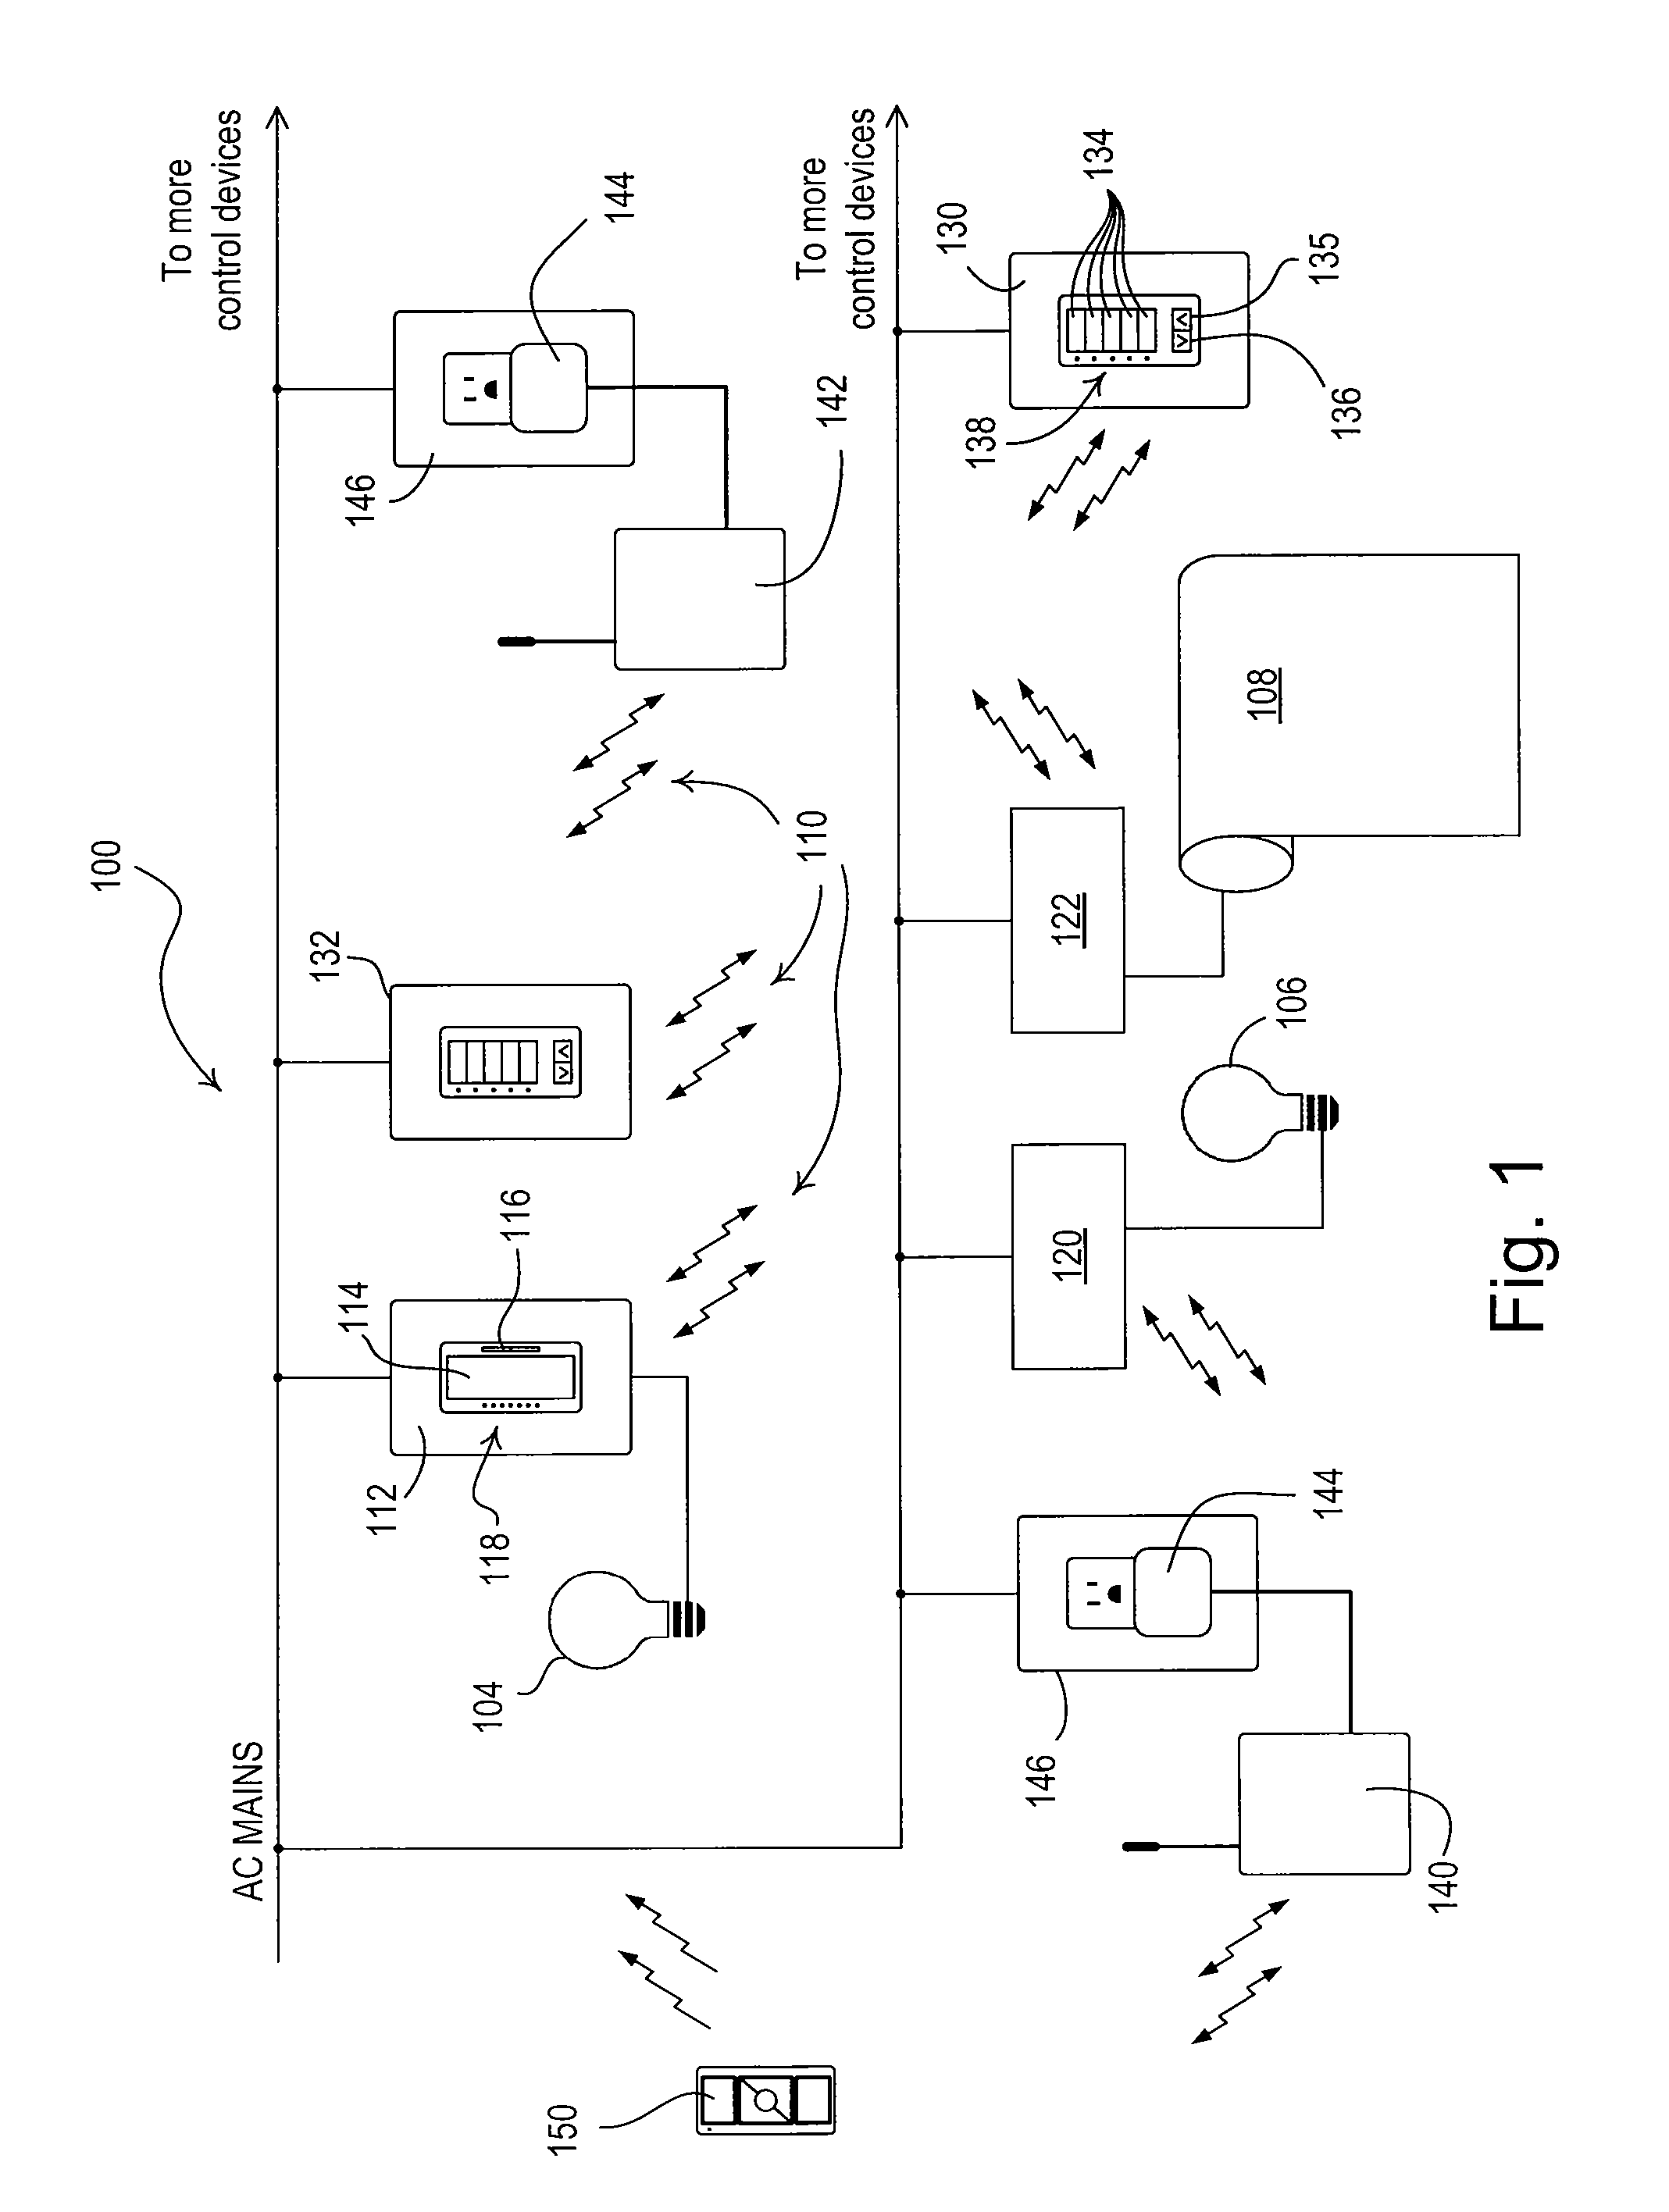 Method of selecting a transmission frequency of a one-way wireless remote control device